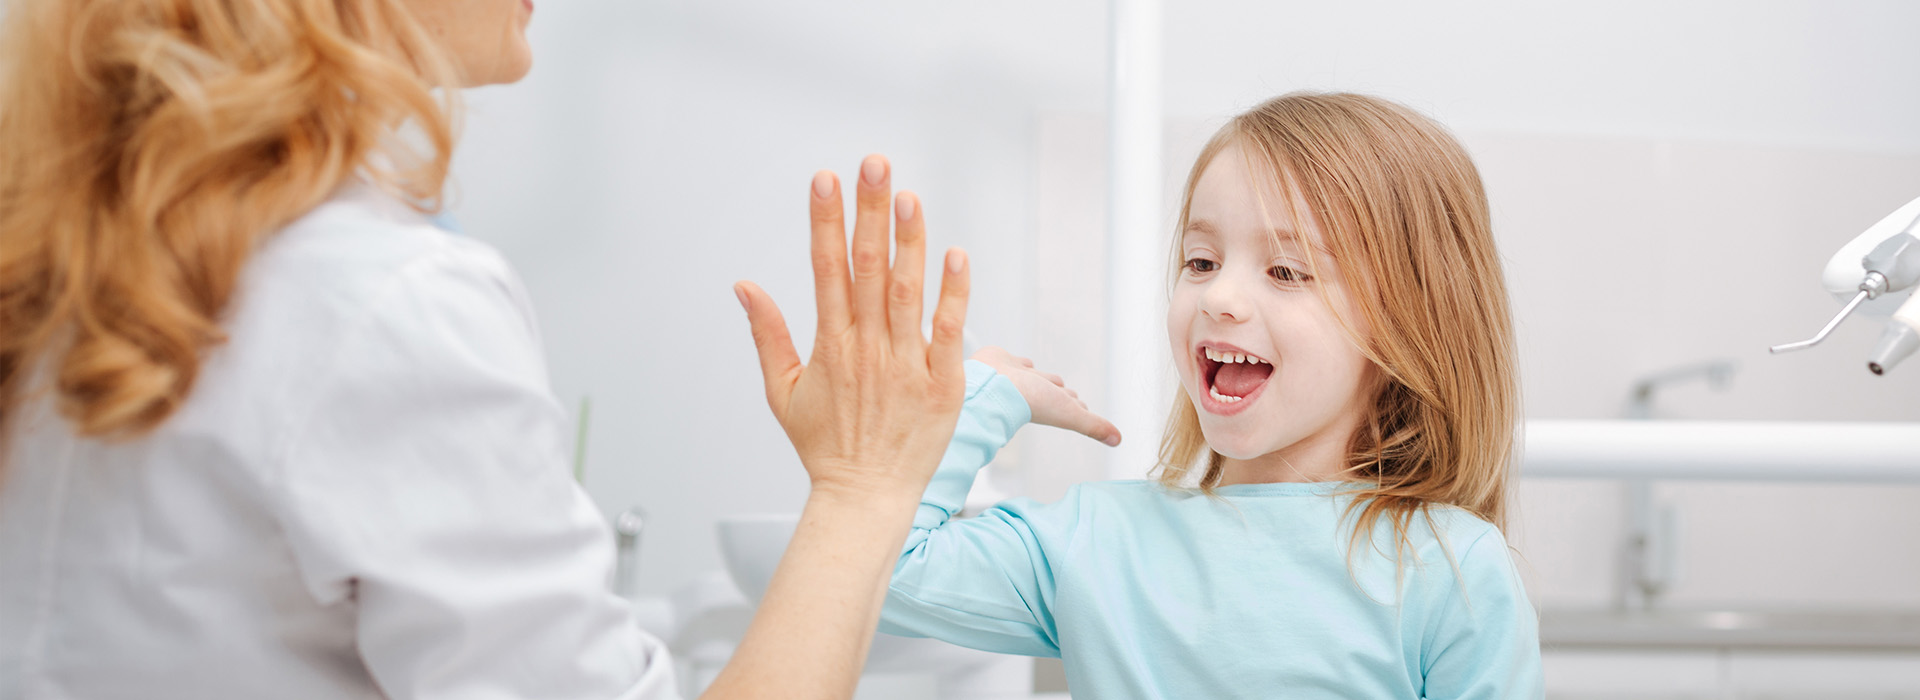 A woman and a young girl in a dental office, with the woman gesturing towards the child.